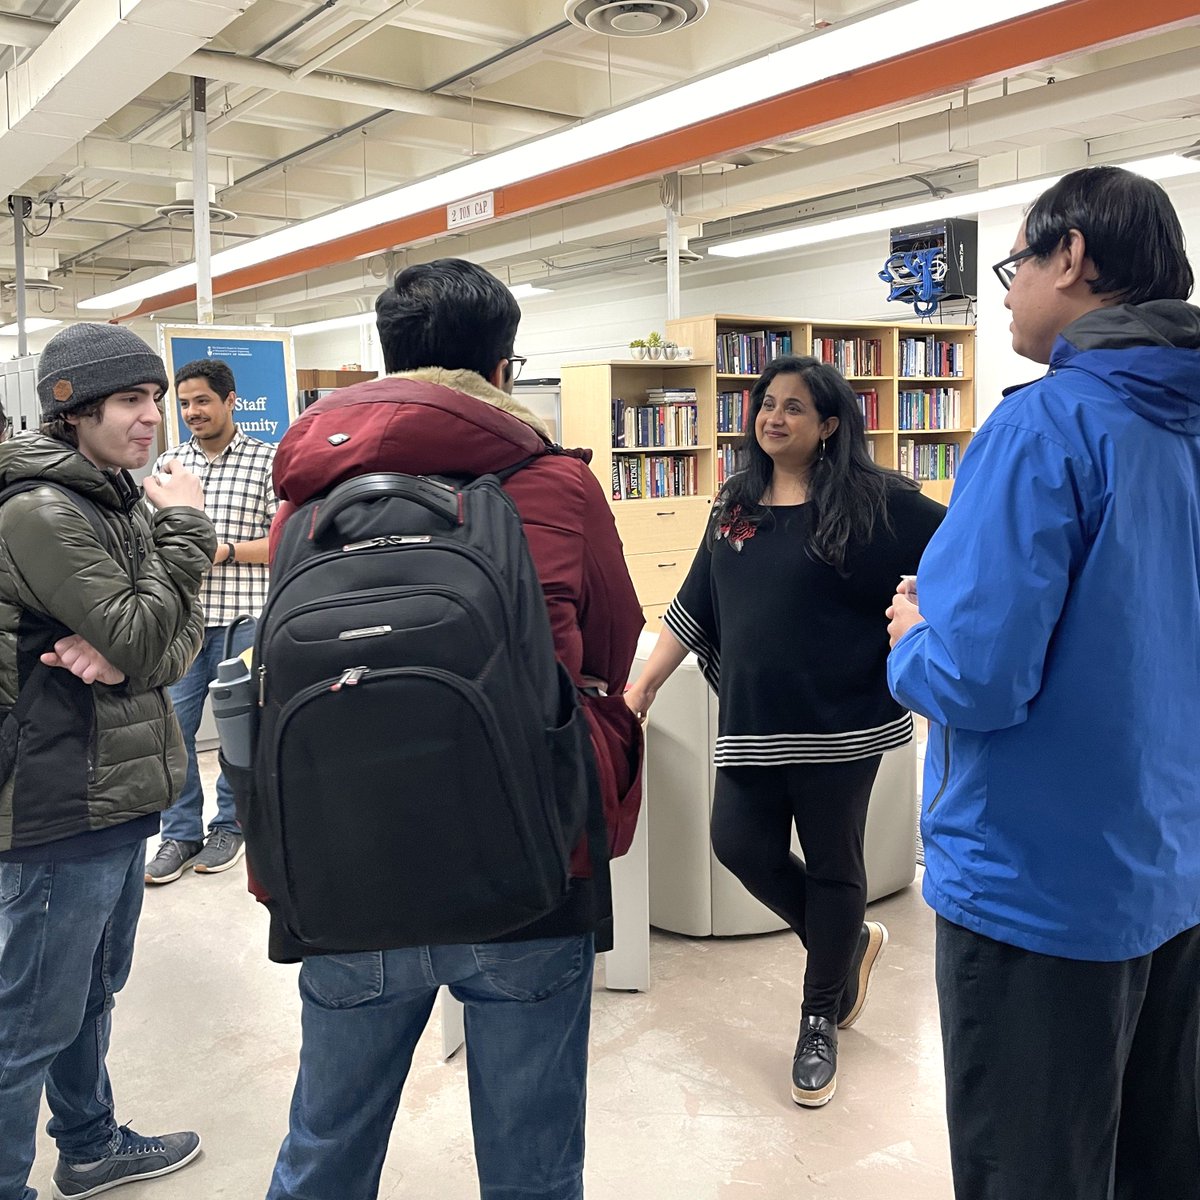 We had a great time catching up with ECE students over coffee and cookies at our social event earlier this month! 🍪☕️ A big thank you to everyone who joined us in SFB520 for a much-needed break and some enjoyable conversations. Let's do it again soon! 📚💡 #UofTEngineering #UofT